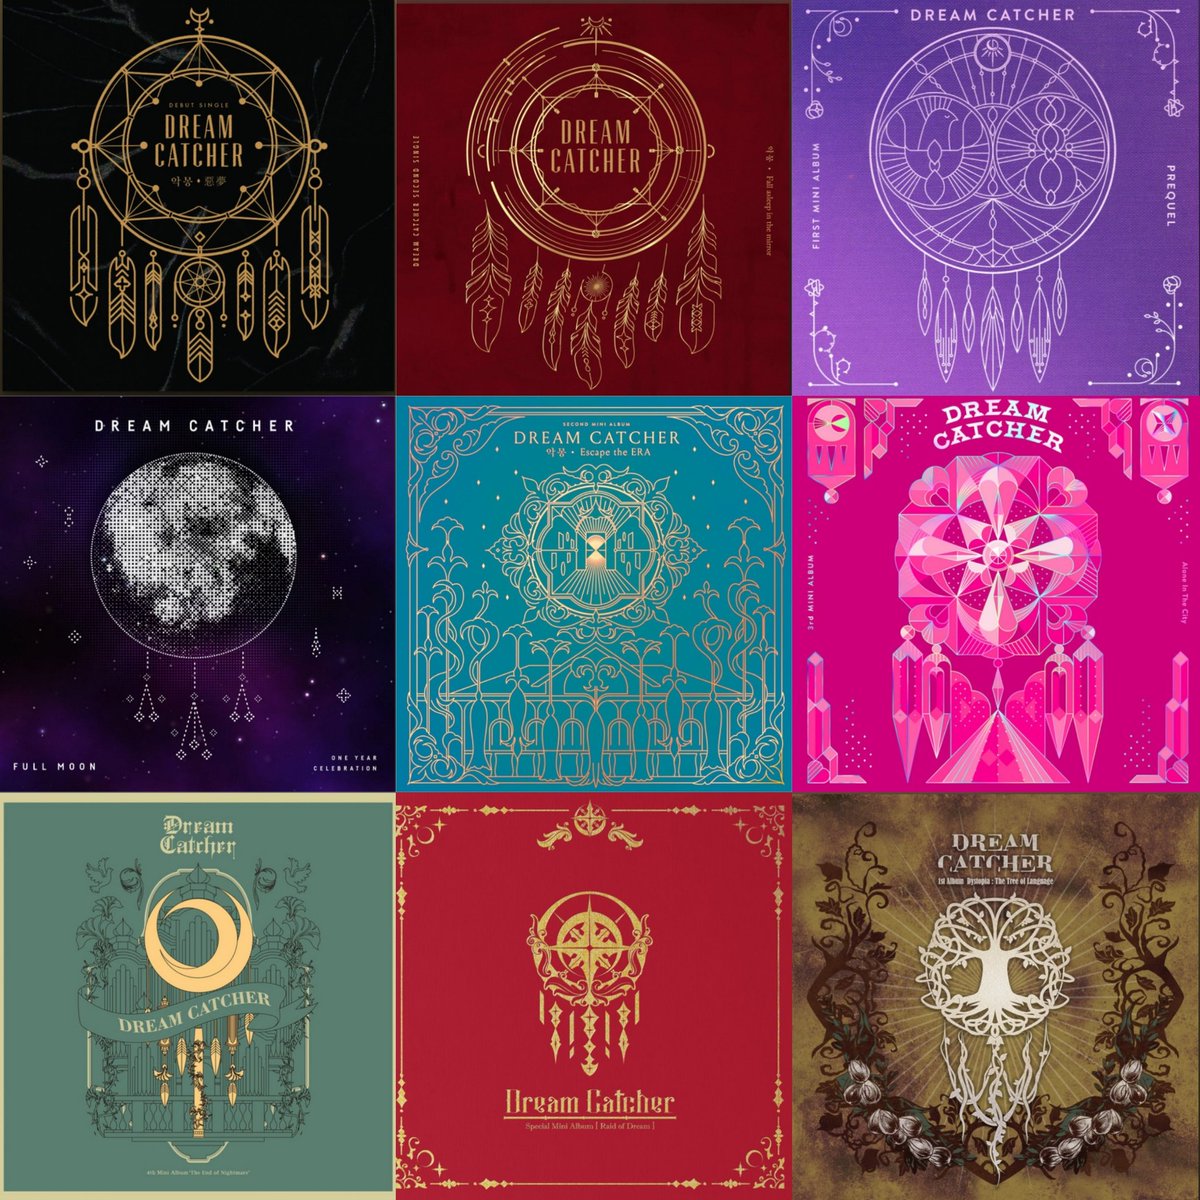 a prompt based on every dreamcatcher song: a thread